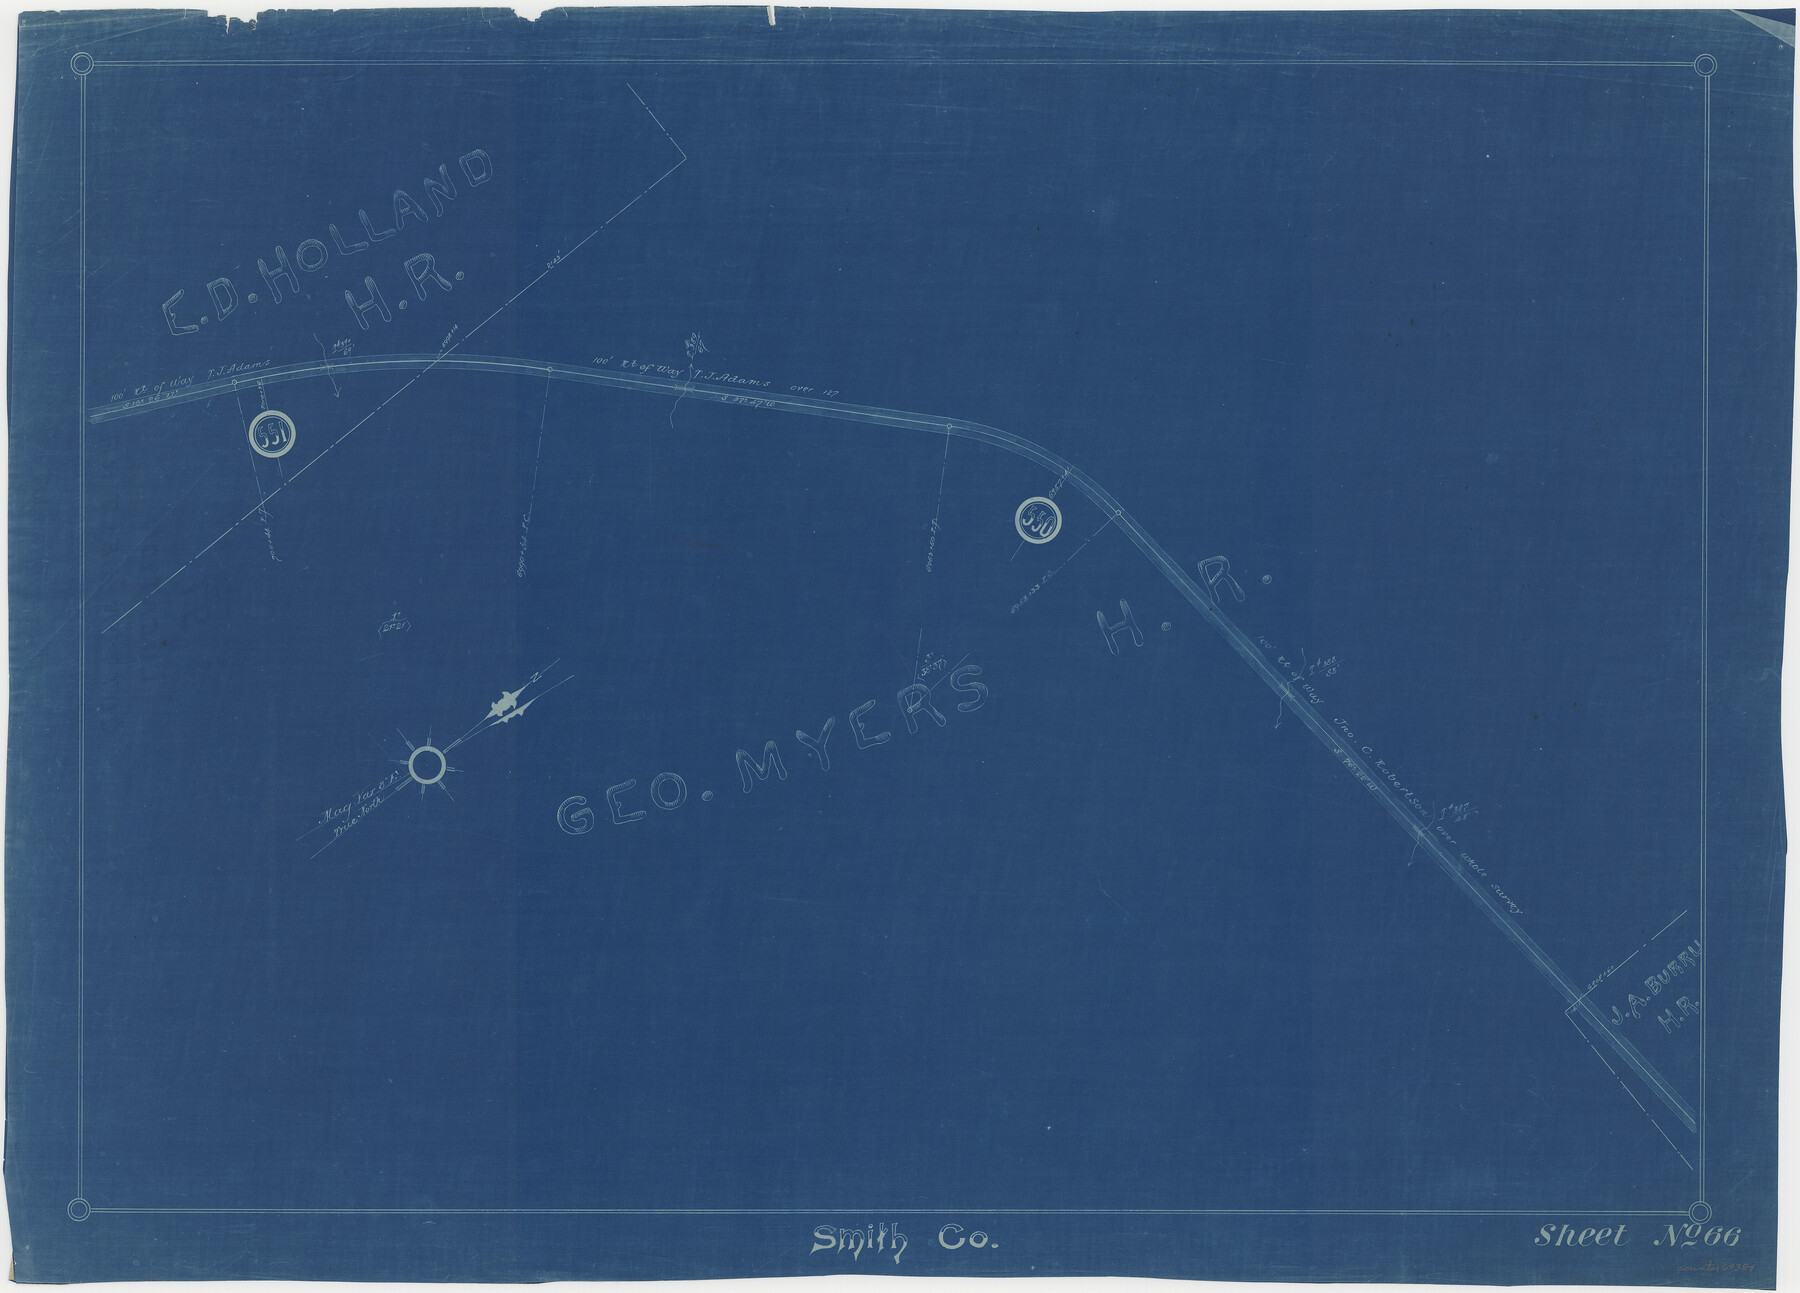 64384, [Cotton Belt, St. Louis Southwestern Railway of Texas, Alignment through Smith County], General Map Collection